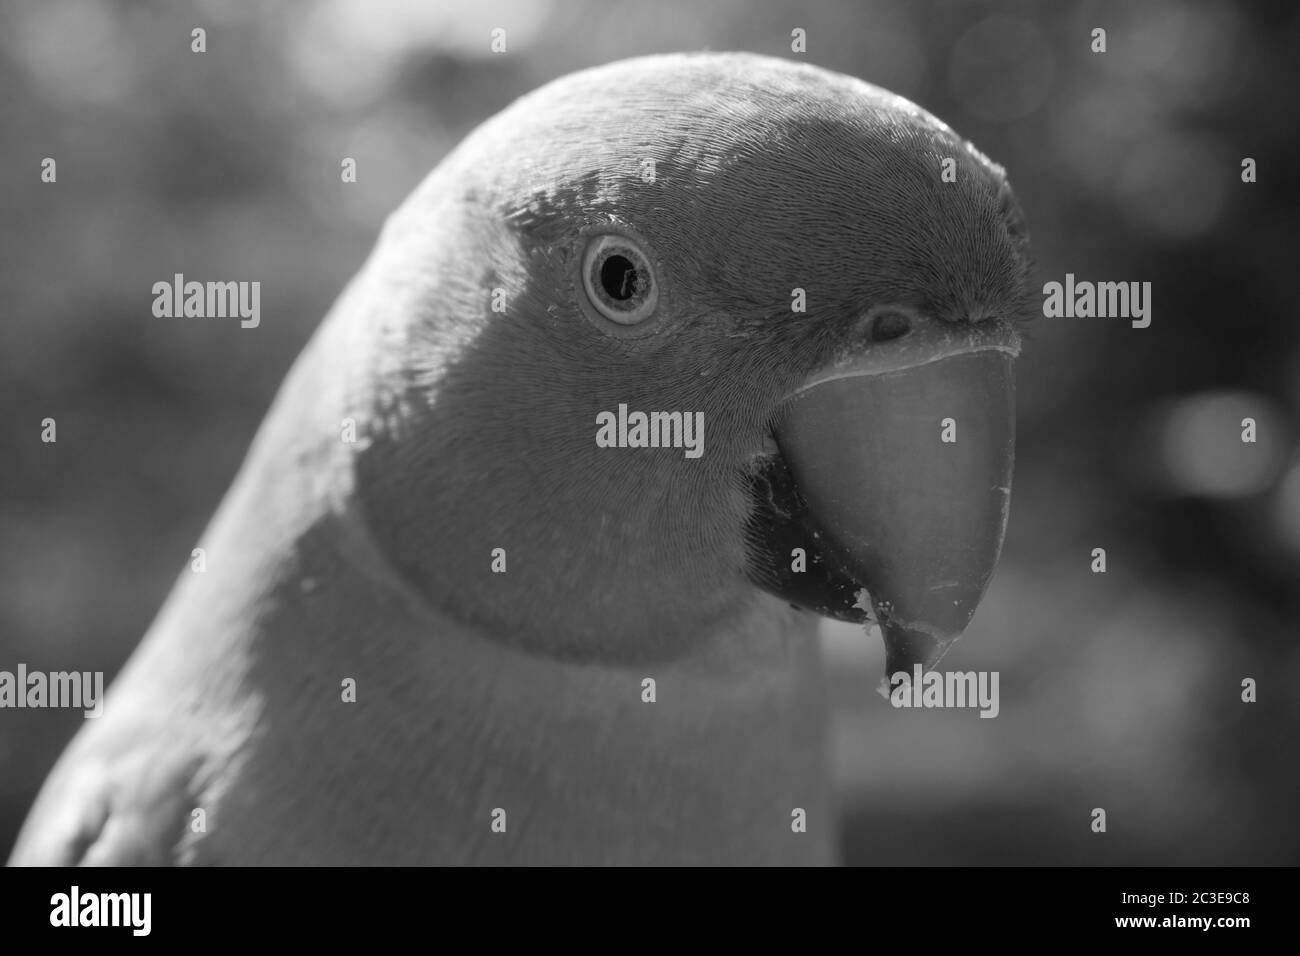 Close Up Black and White Portrait of a Female Rose-Ringed Parakeet Stock Photo